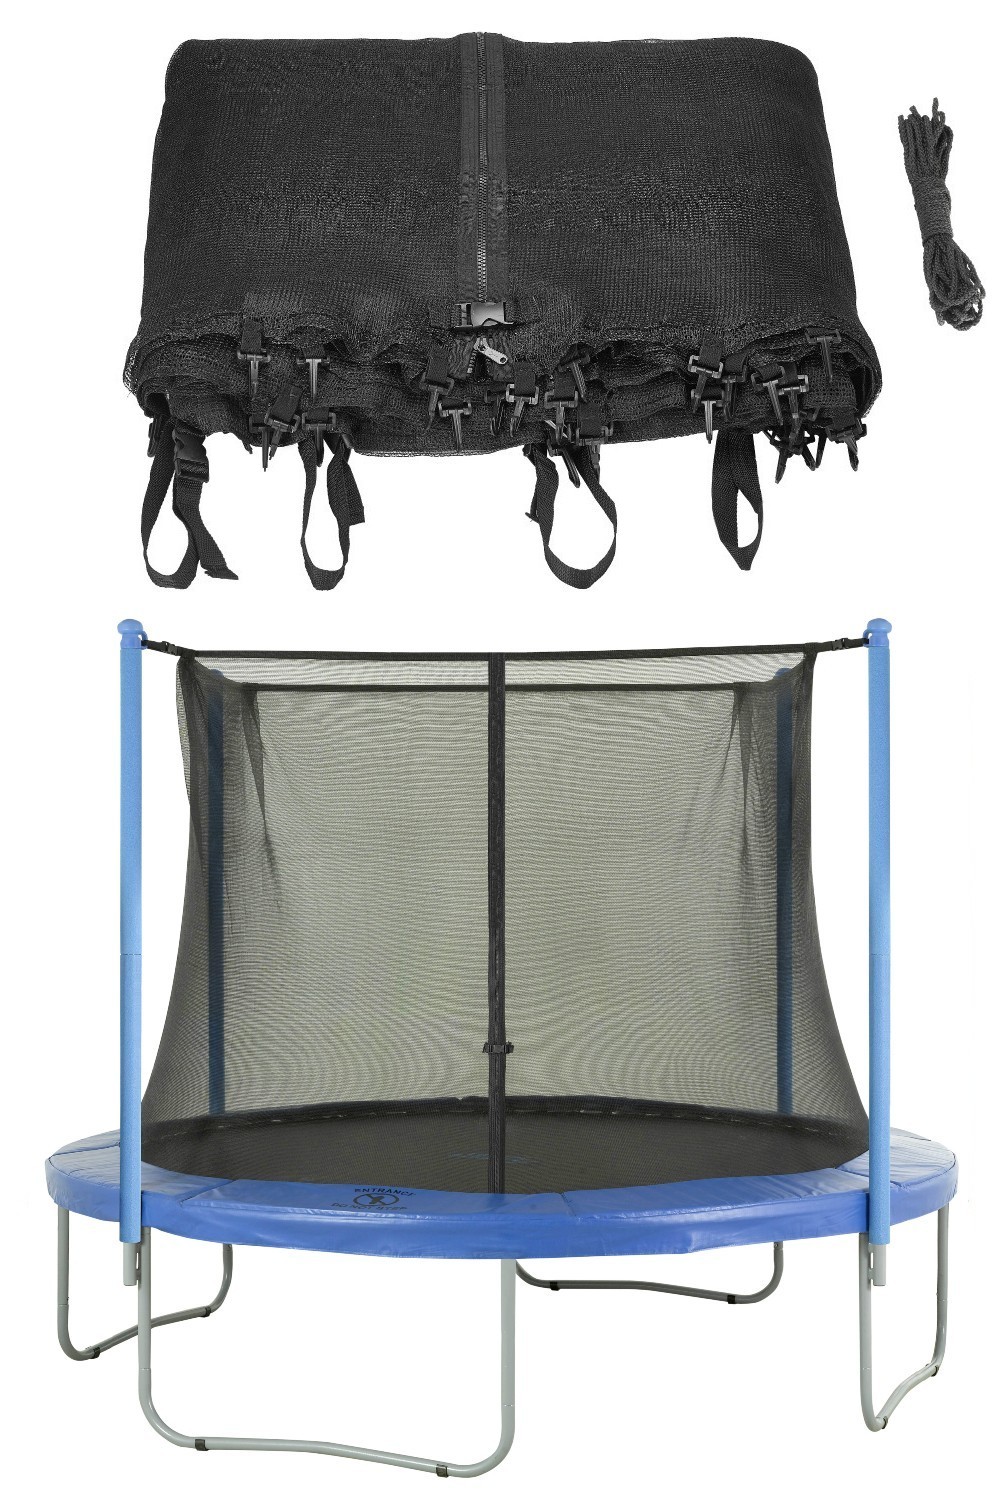 Trampoline Replacement Enclosure Safety Net, fits for 14 FT. Round Frames using 4 Poles or 2 Arches - Net Only